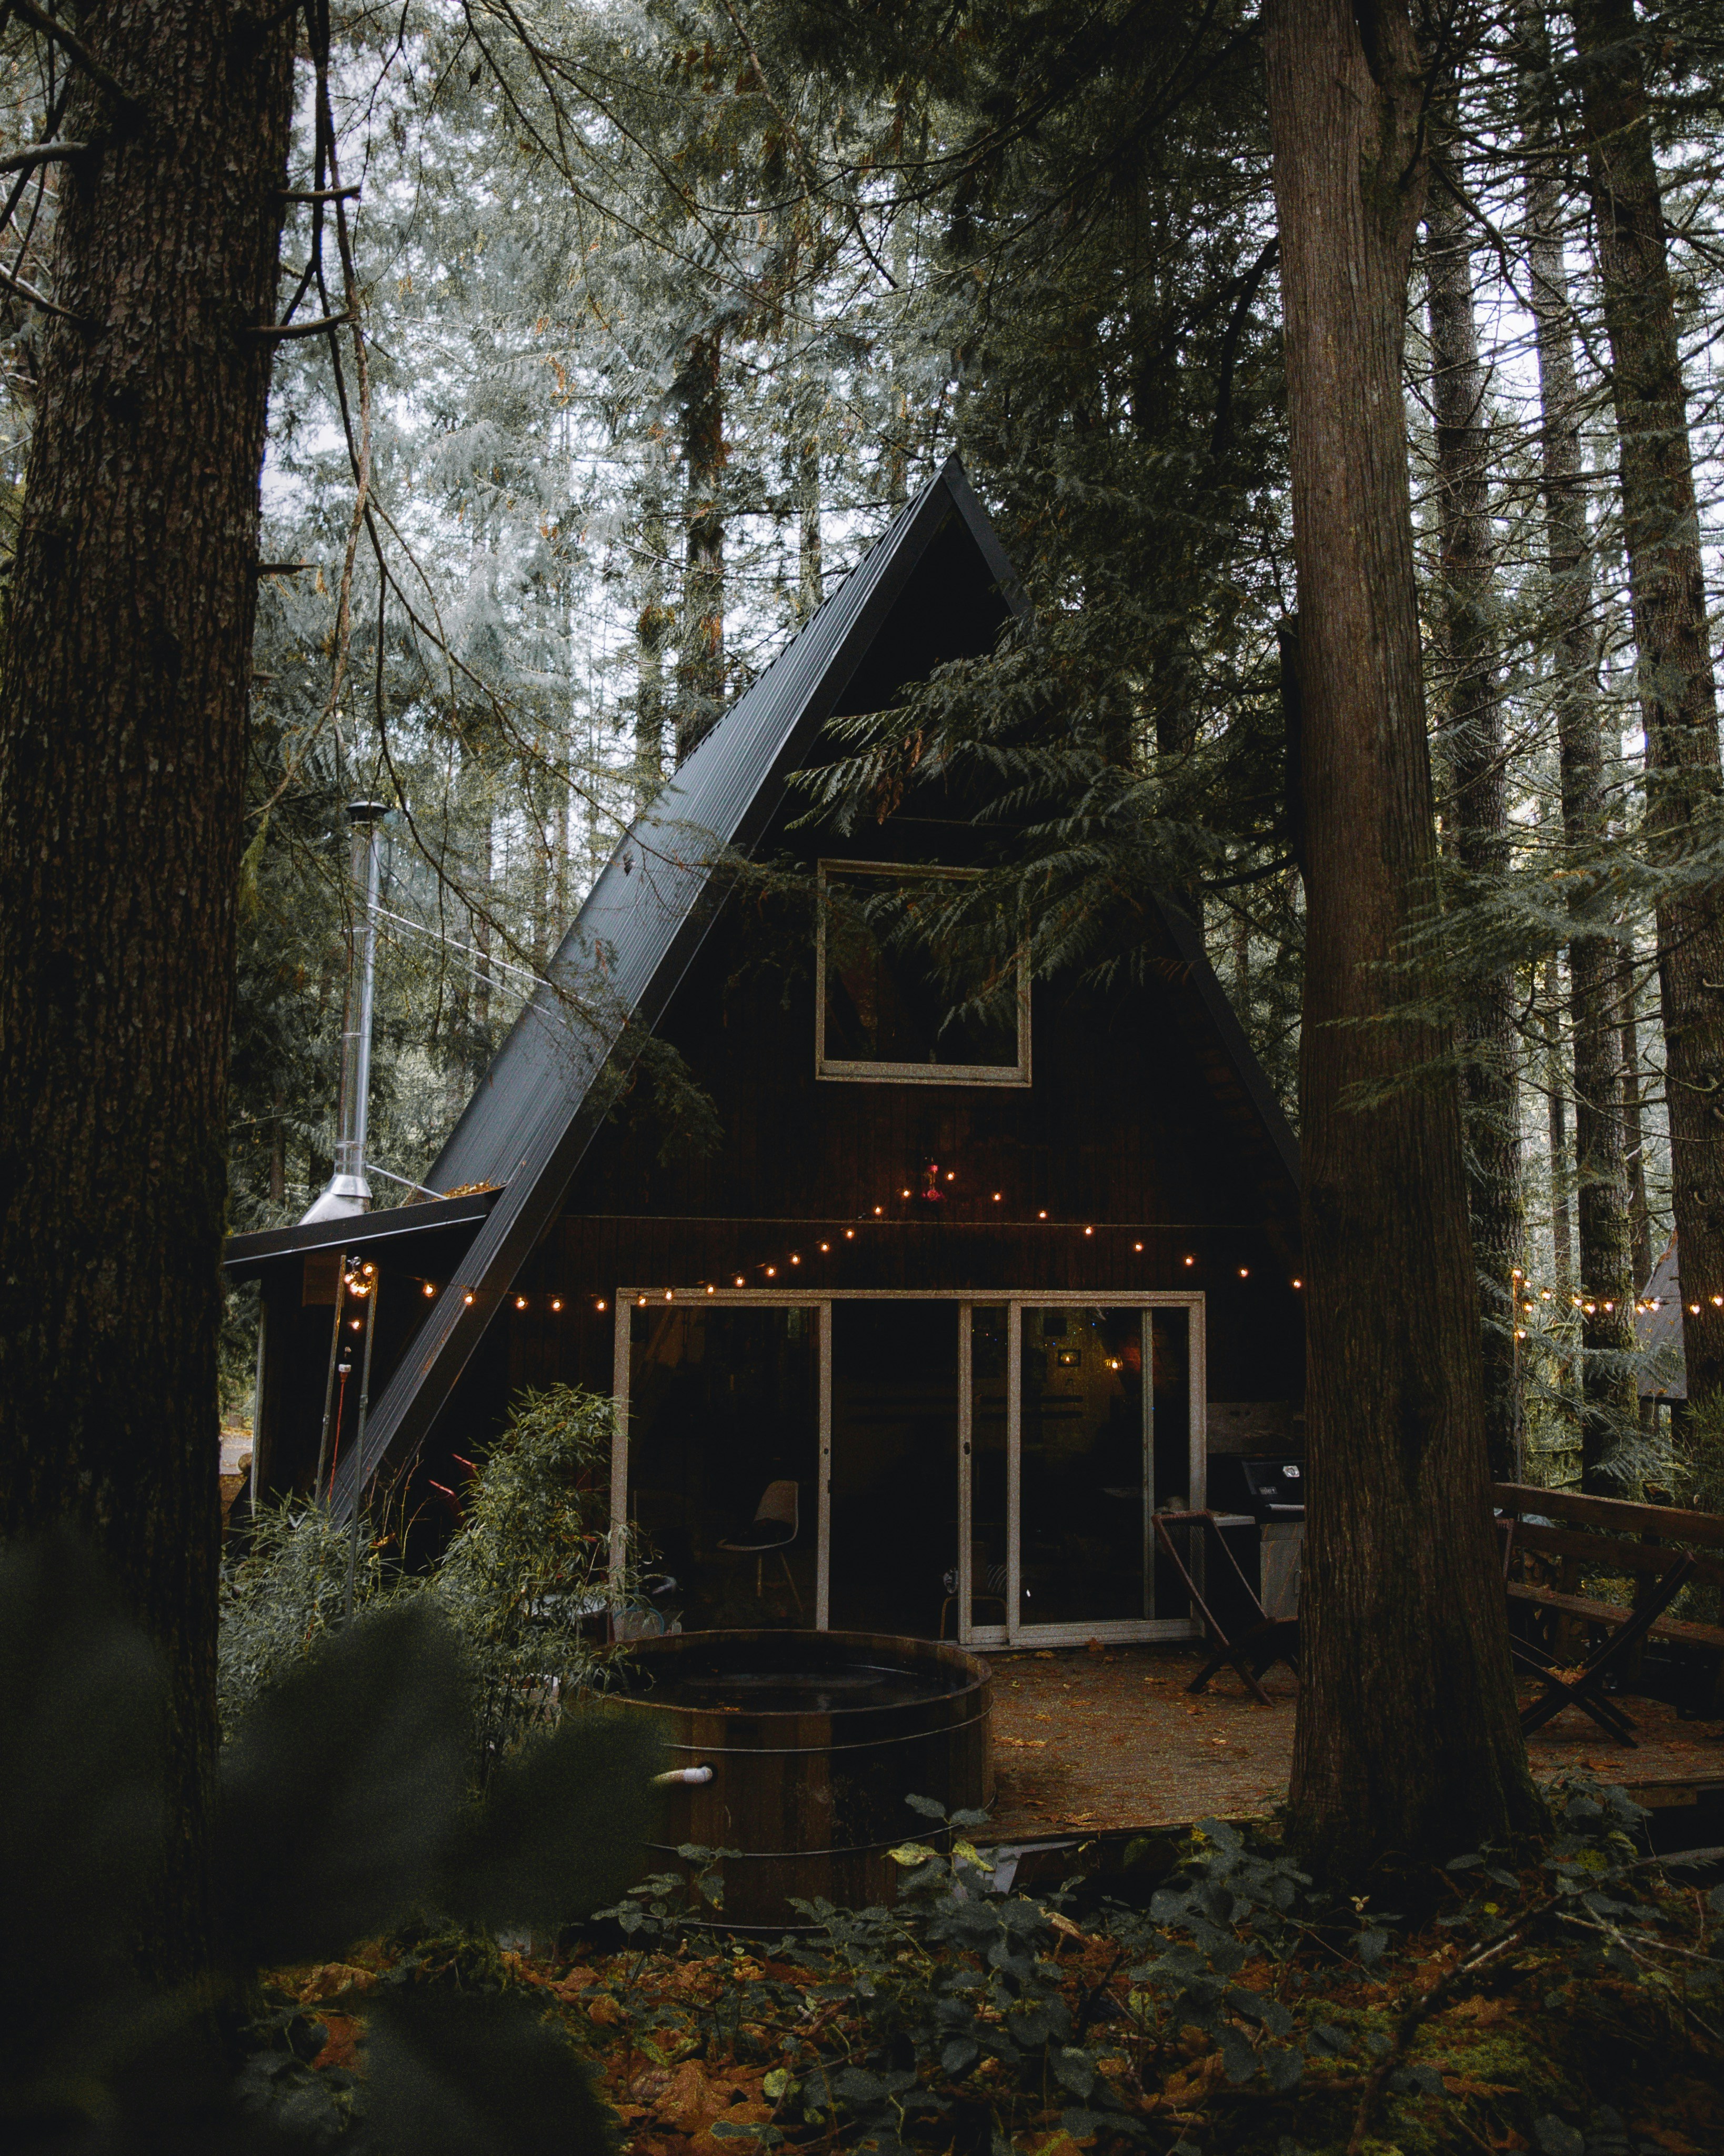 After a long day of travel it was absolute heaven to be able to kick back and relax with good company in the Little Owl Cabin in Washington State. Surrounded by lush temperate rainforest, a fire going out front, and the hot tub warming up out back. This is my idea of a perfect weekend.